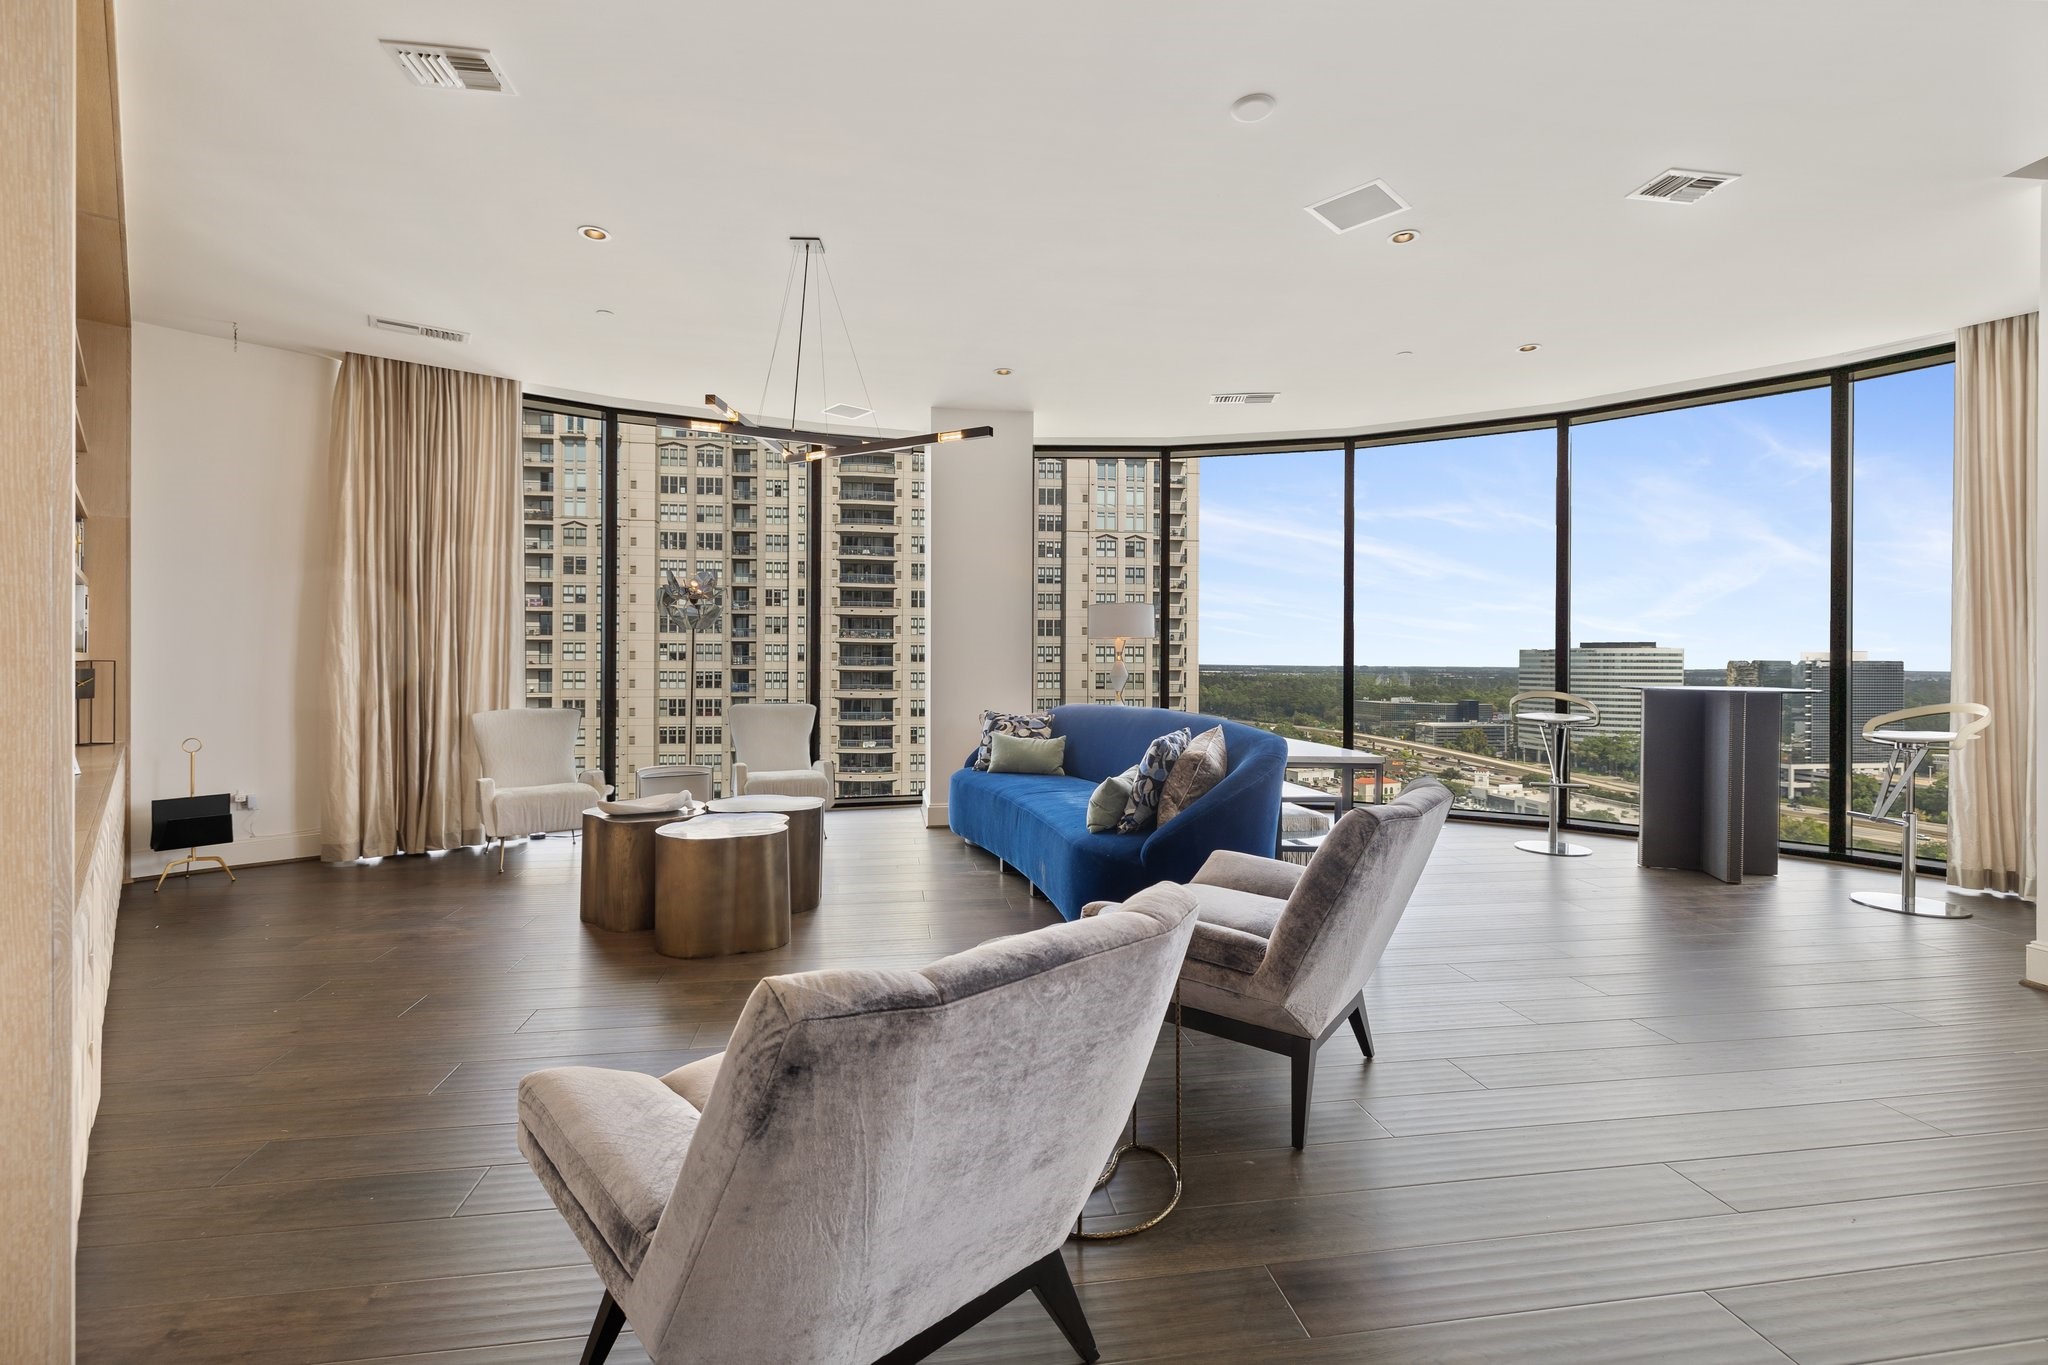 Floor-to-ceiling windows showcasing a city view. Neutral remote shades & curtains hang gracefully on one side, and sleek brand-new flooring adds warmth to the modern space. A minimalist pendant light fixture hangs from the ceiling, completing the elegant ambiance.